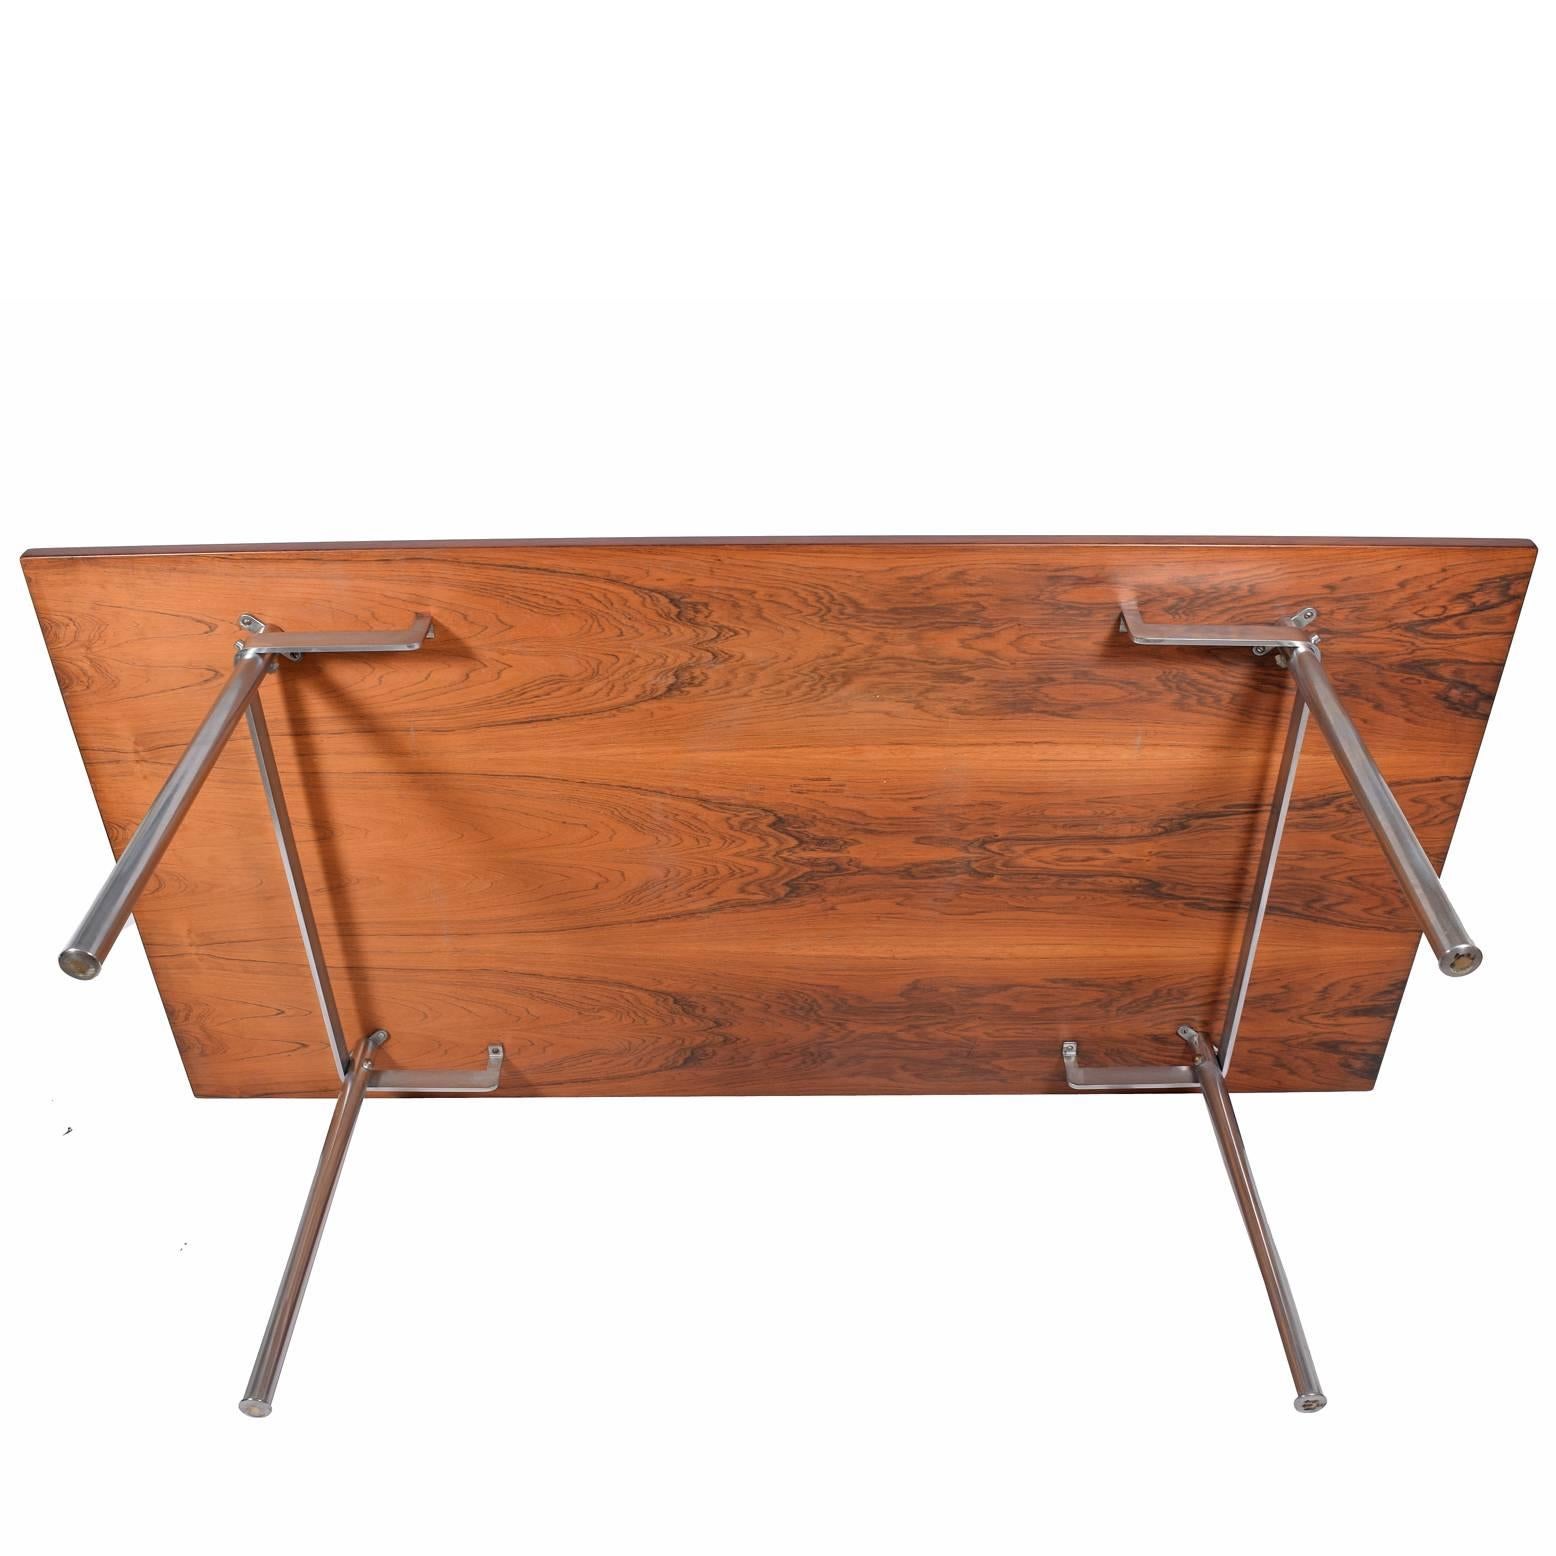 Steel Working Dining Rosewood Table by Hans Wegner #AT-318 for Andreas Tuck For Sale